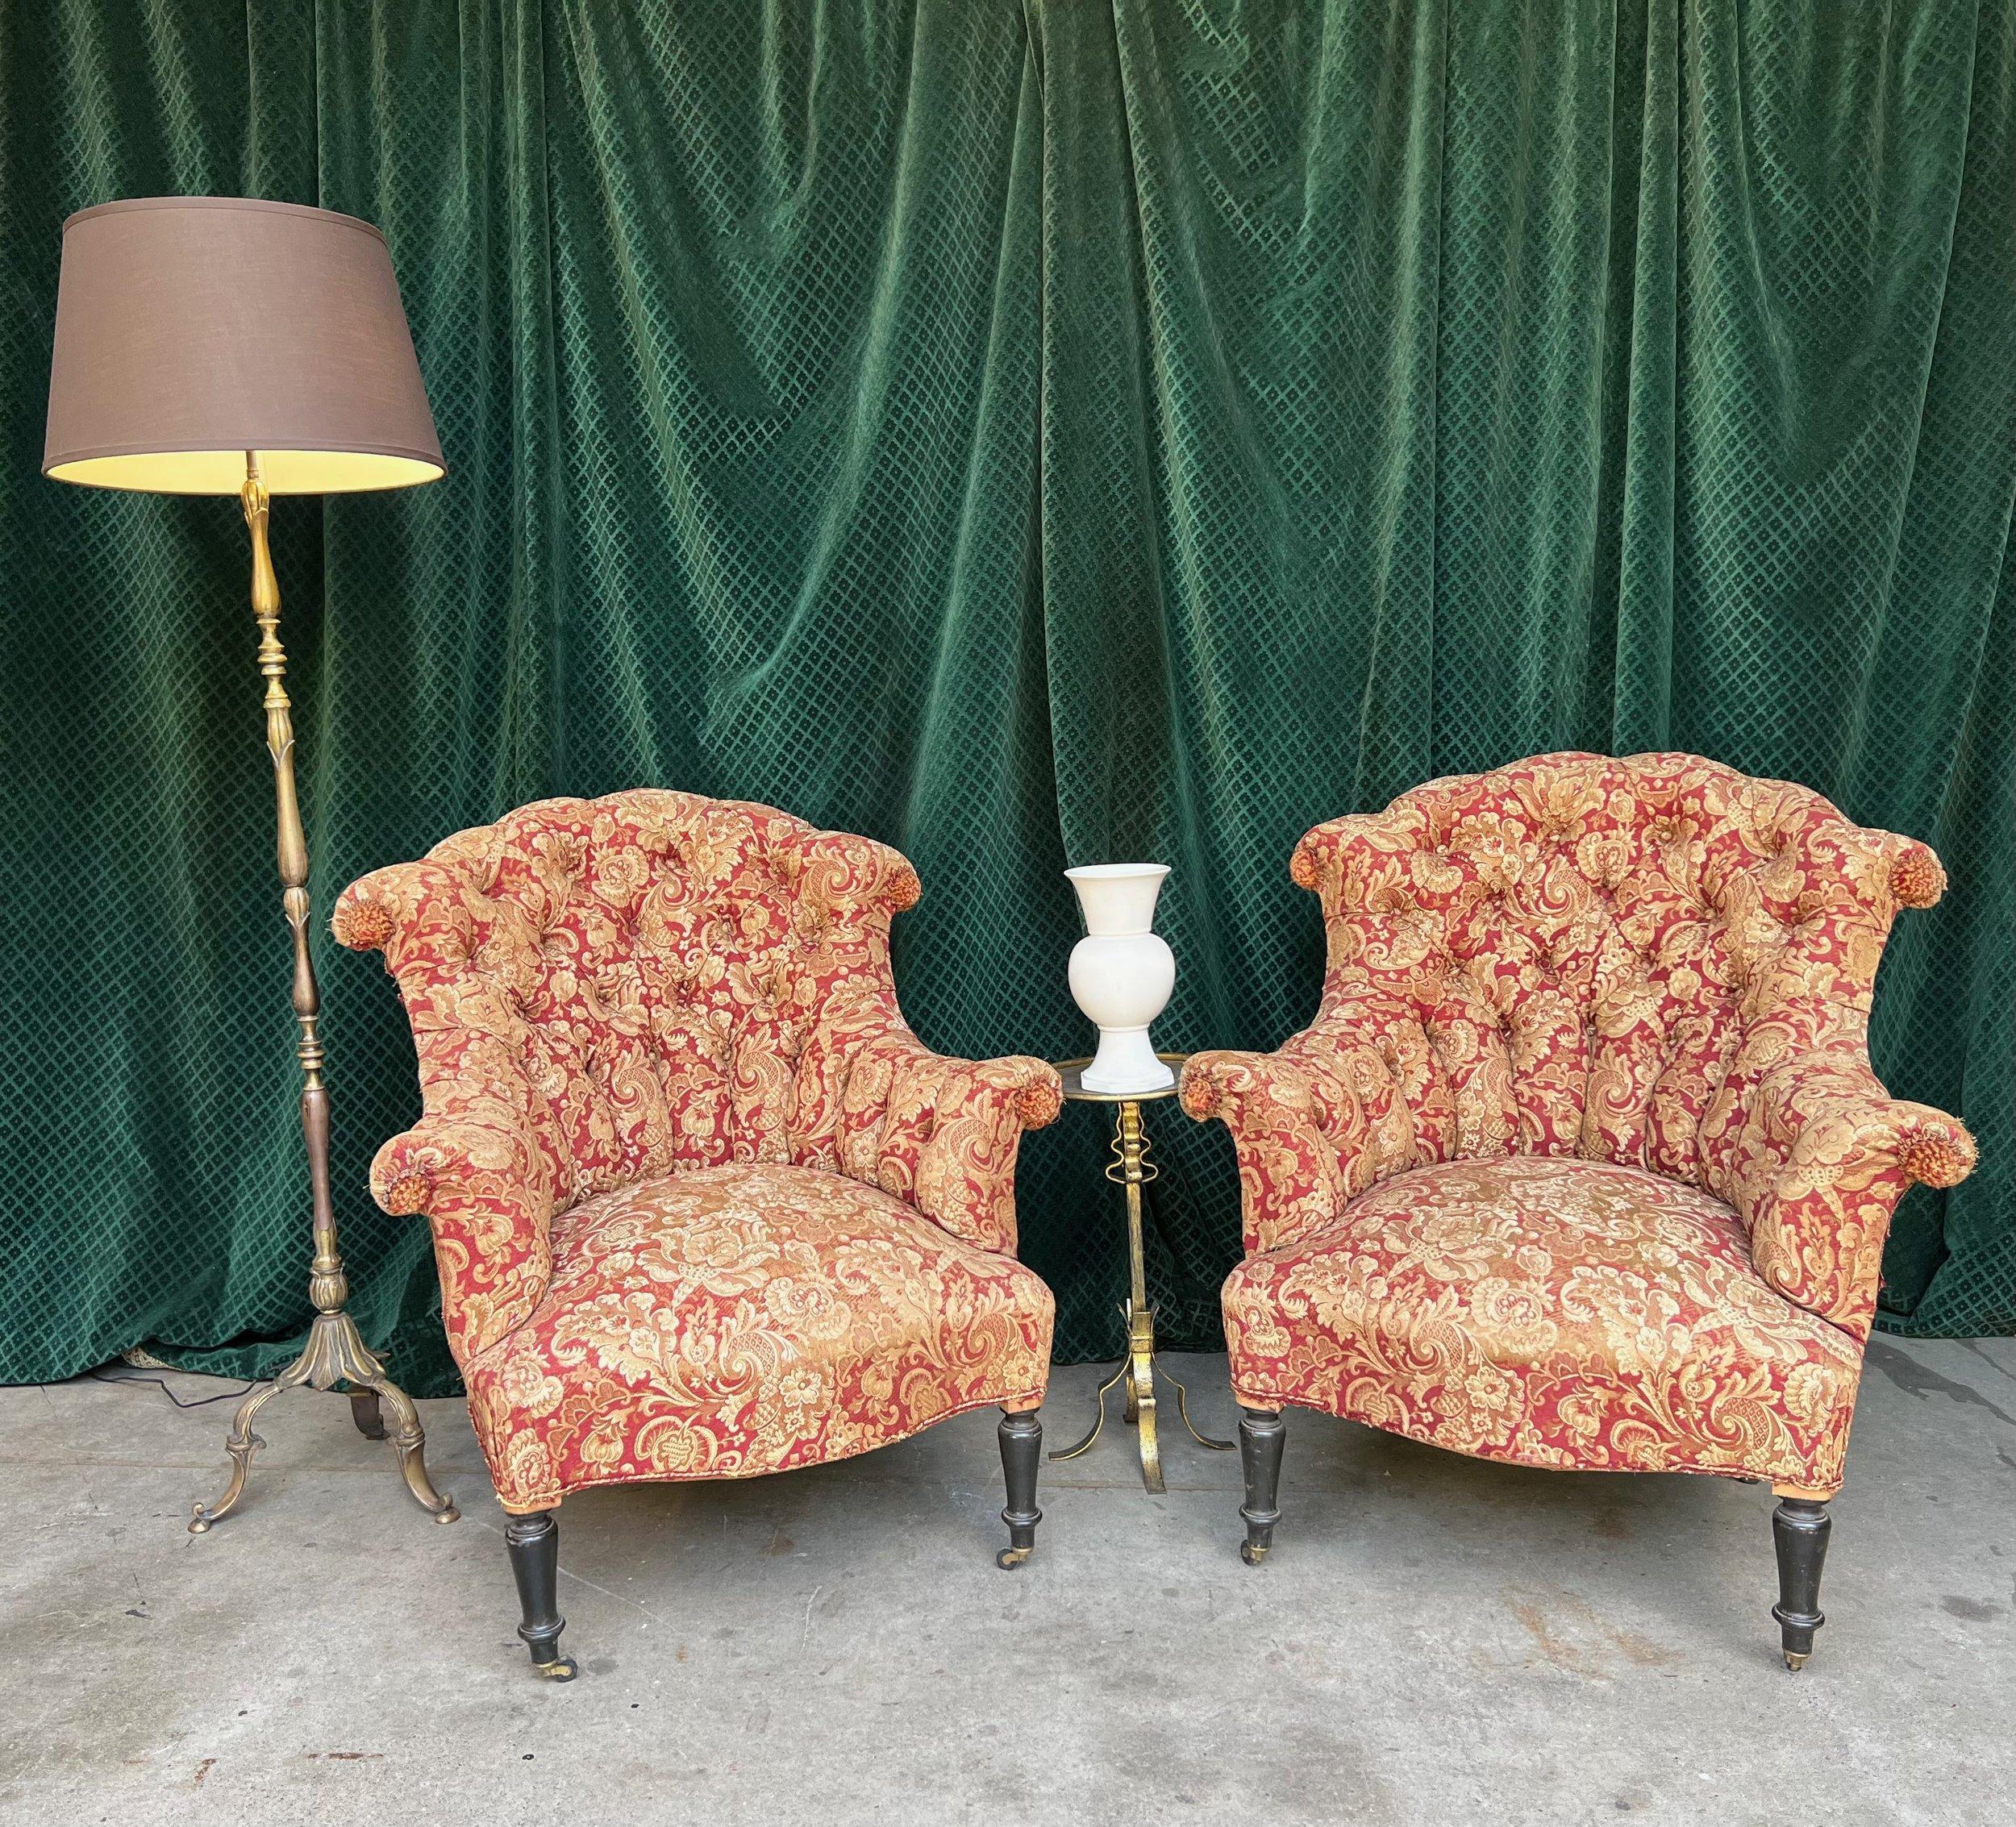 Napoleon III Pair of Tufted and Scrolled Back Chairs in Printed Velvet